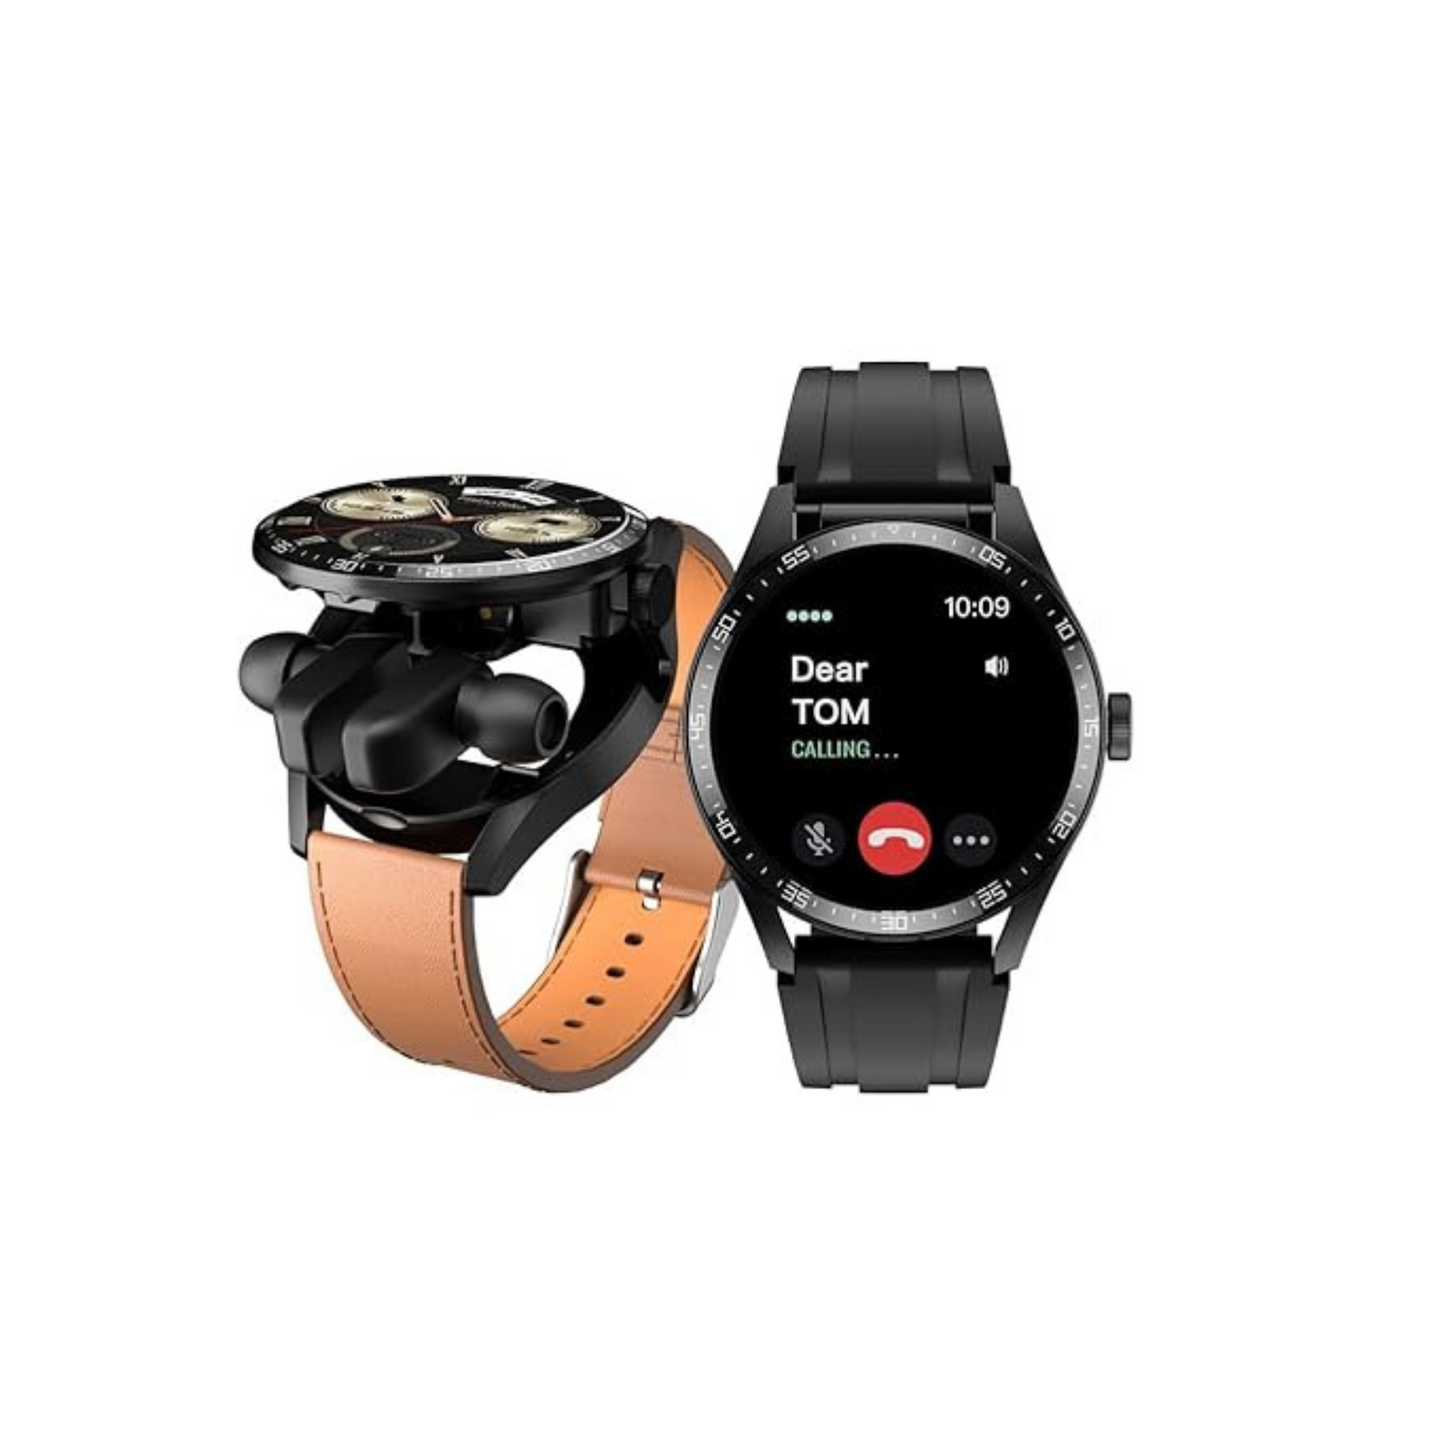 Premium RW-37 Watch Buds With Large Screen Round Shape AMOLED Display for Ladies and Gents_Black